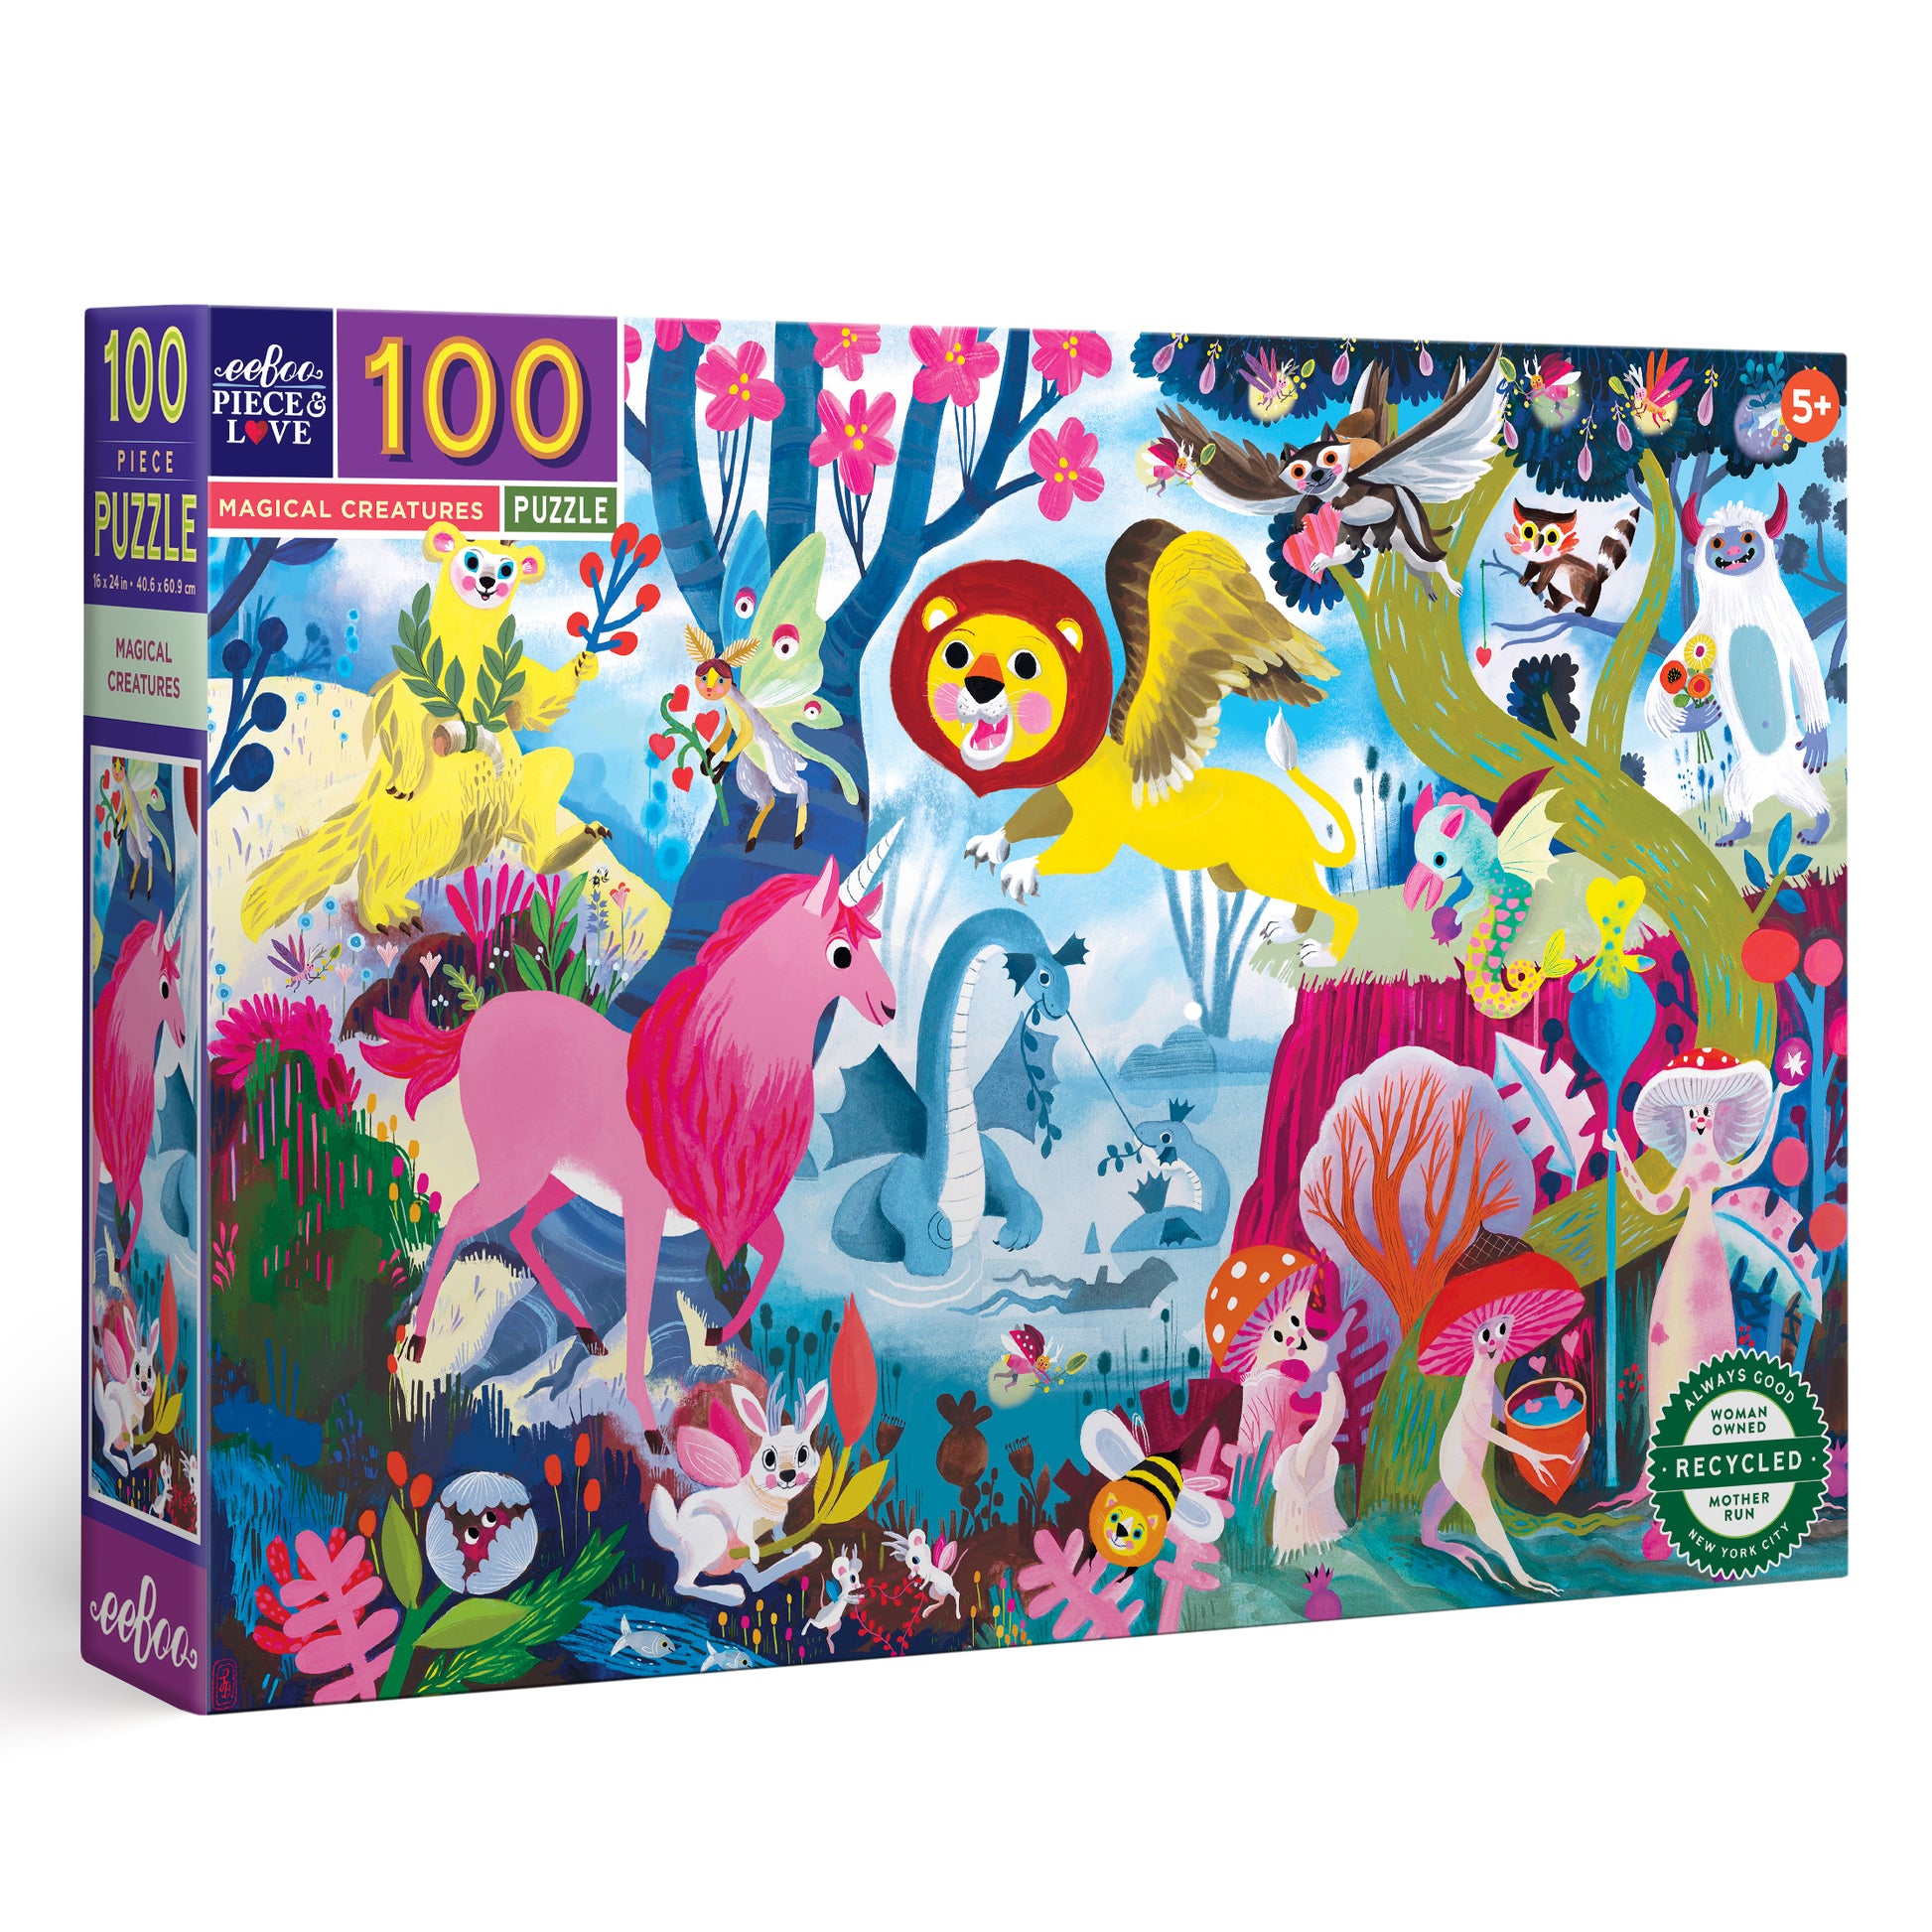 Magical Creatures 100 Piece Puzzle | Unique Fun Gifts for Kids Ages 5+